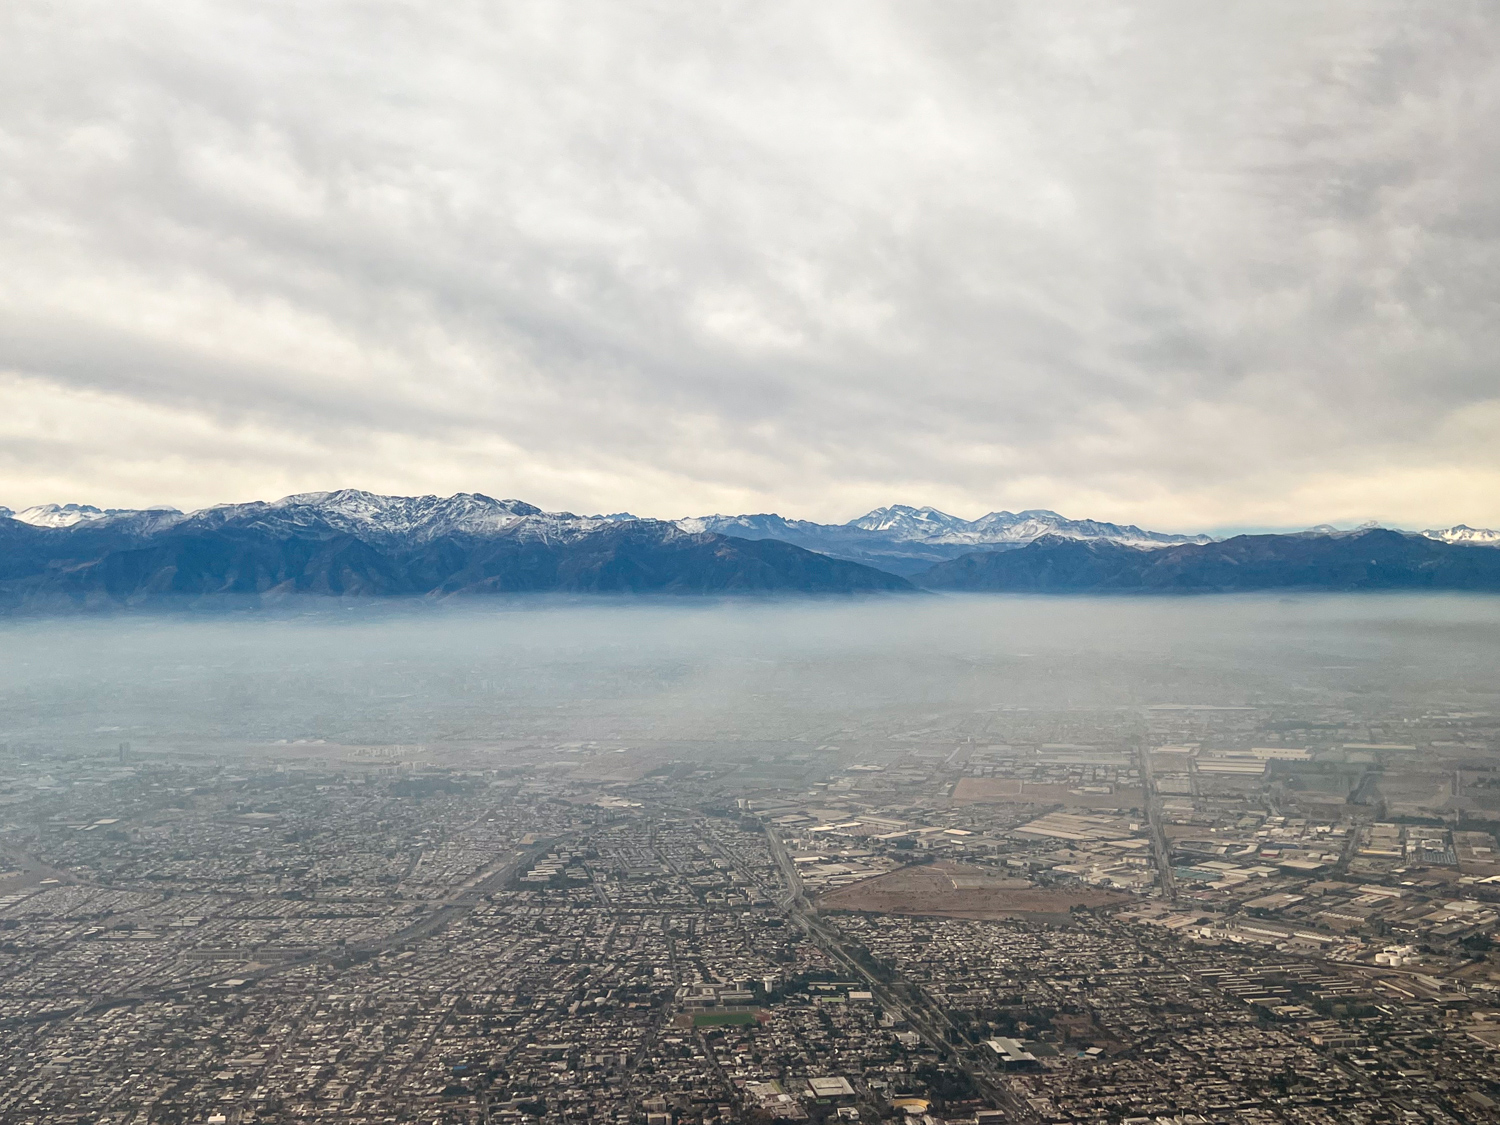 Snow-capped mountains come into view during takeoff from Santiago, Chile (photo by Kelly Lemons).